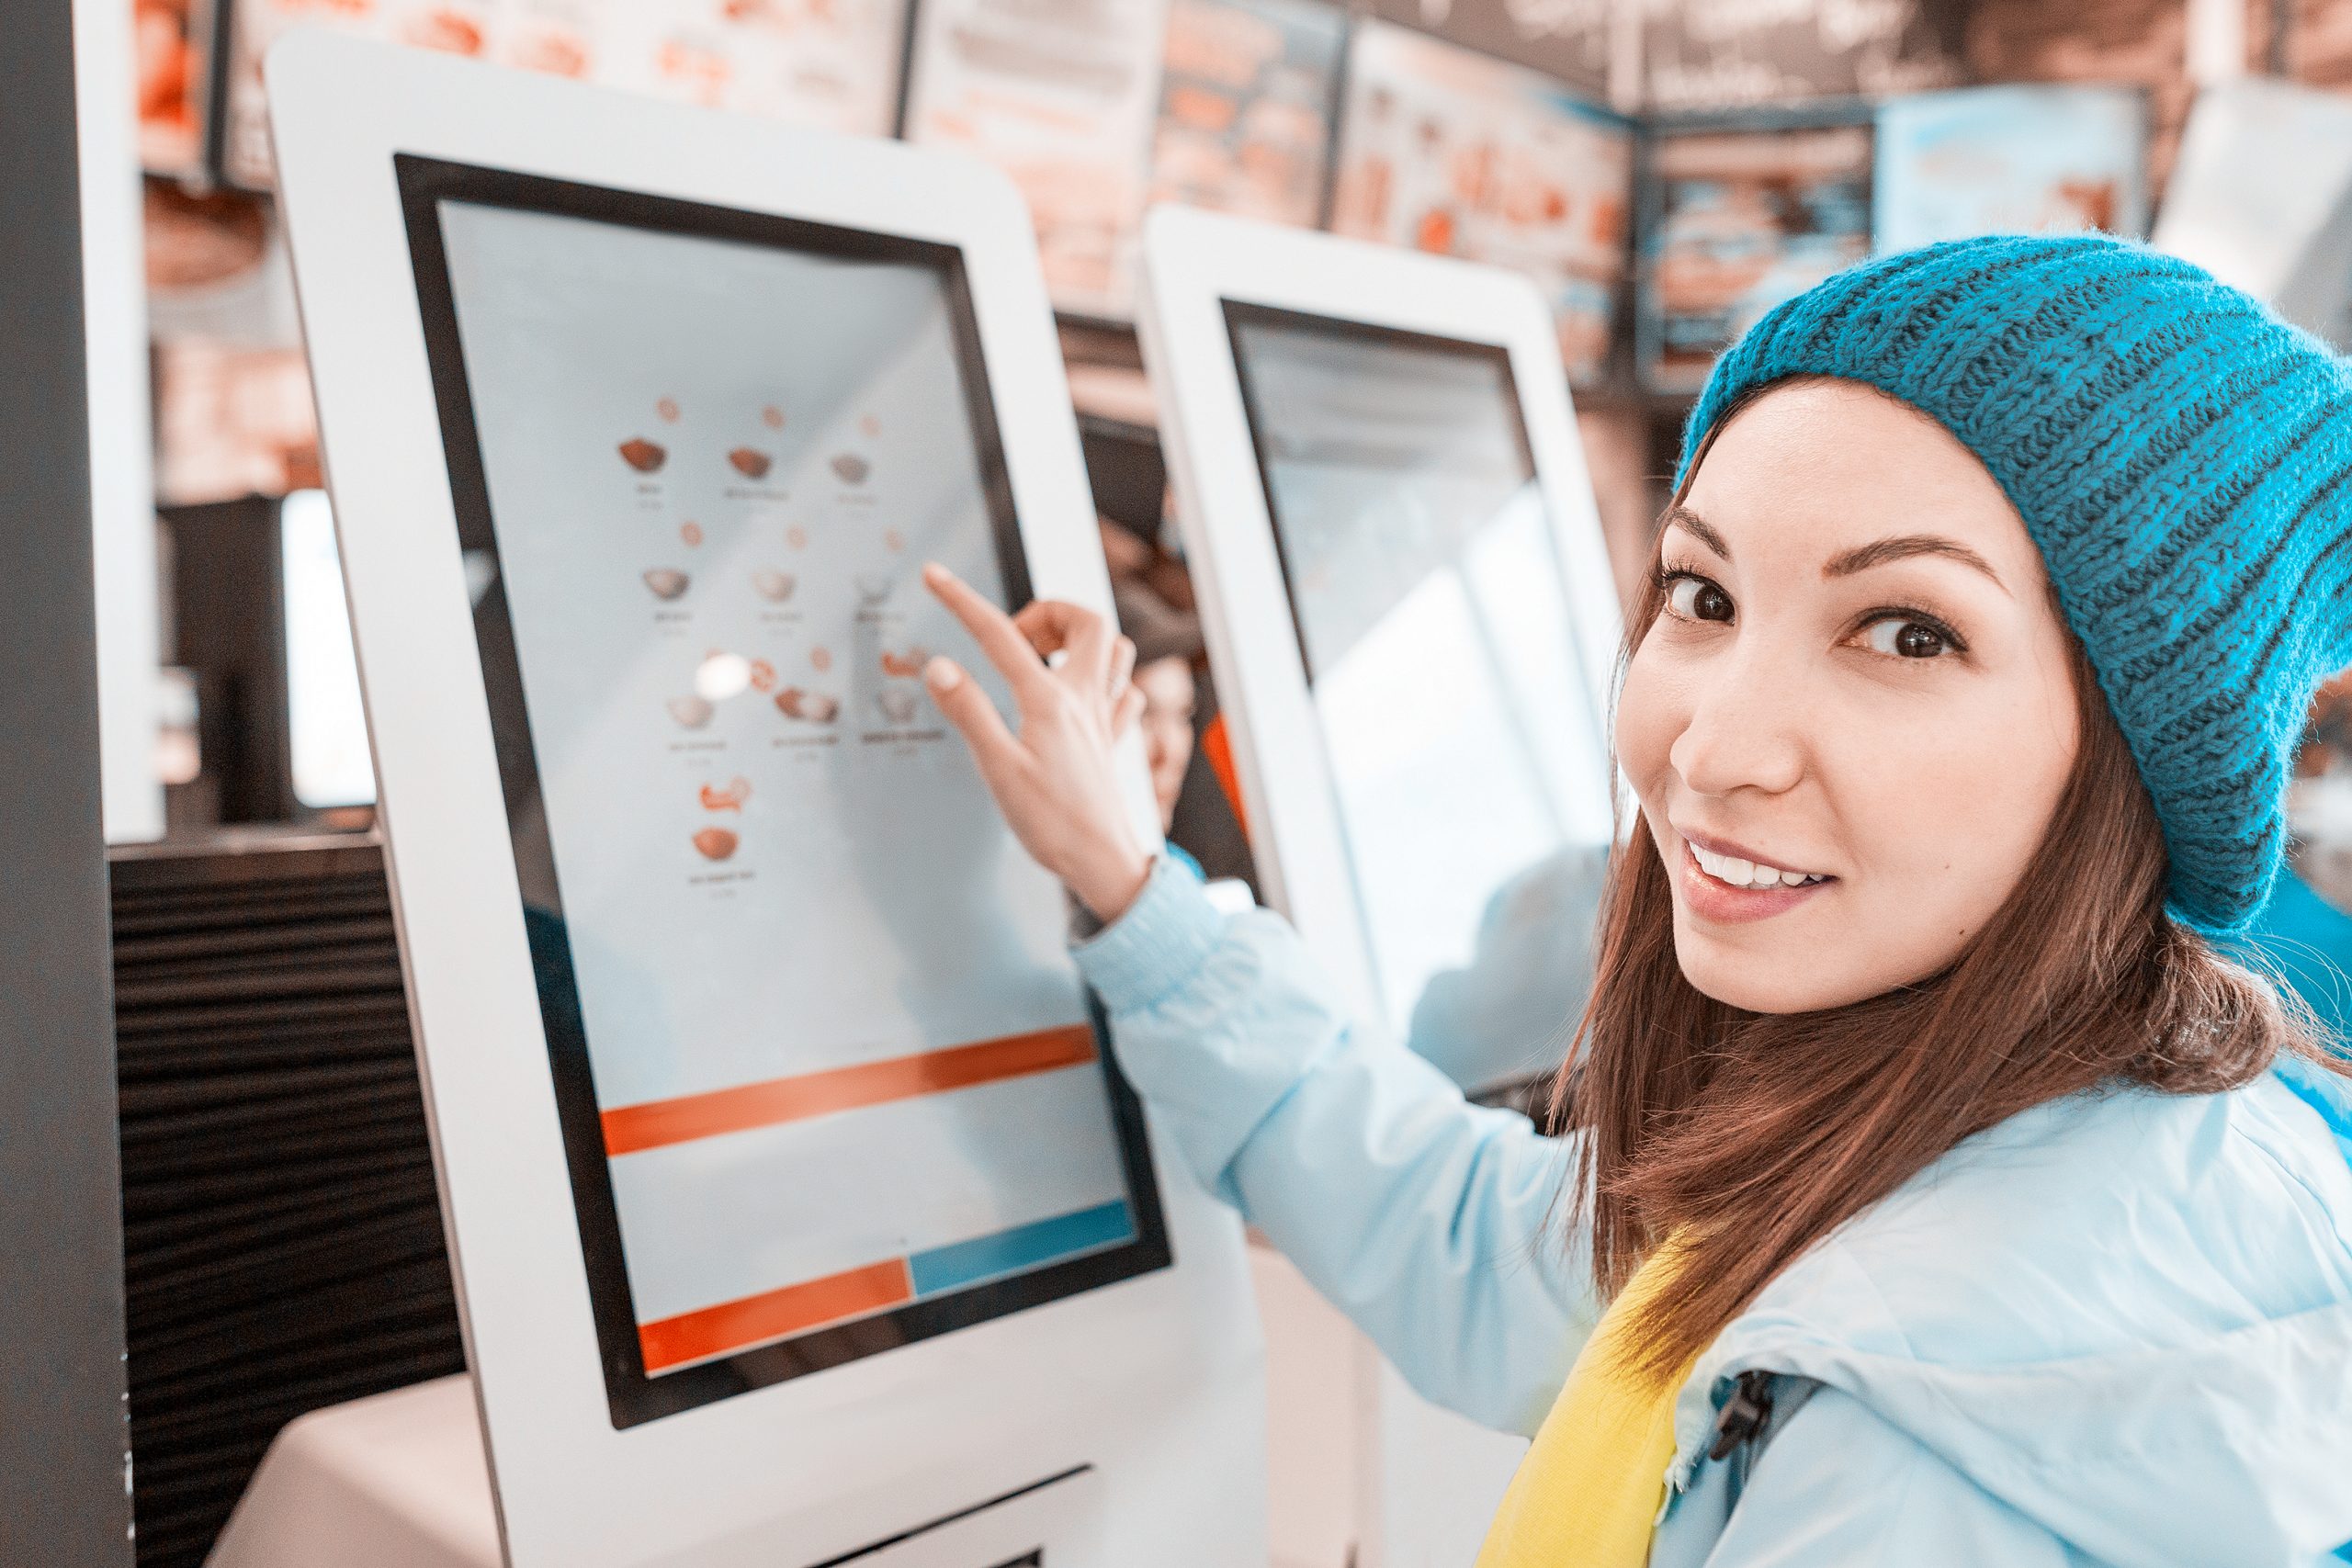 Think about scalability before deciding on your kiosk management strategy